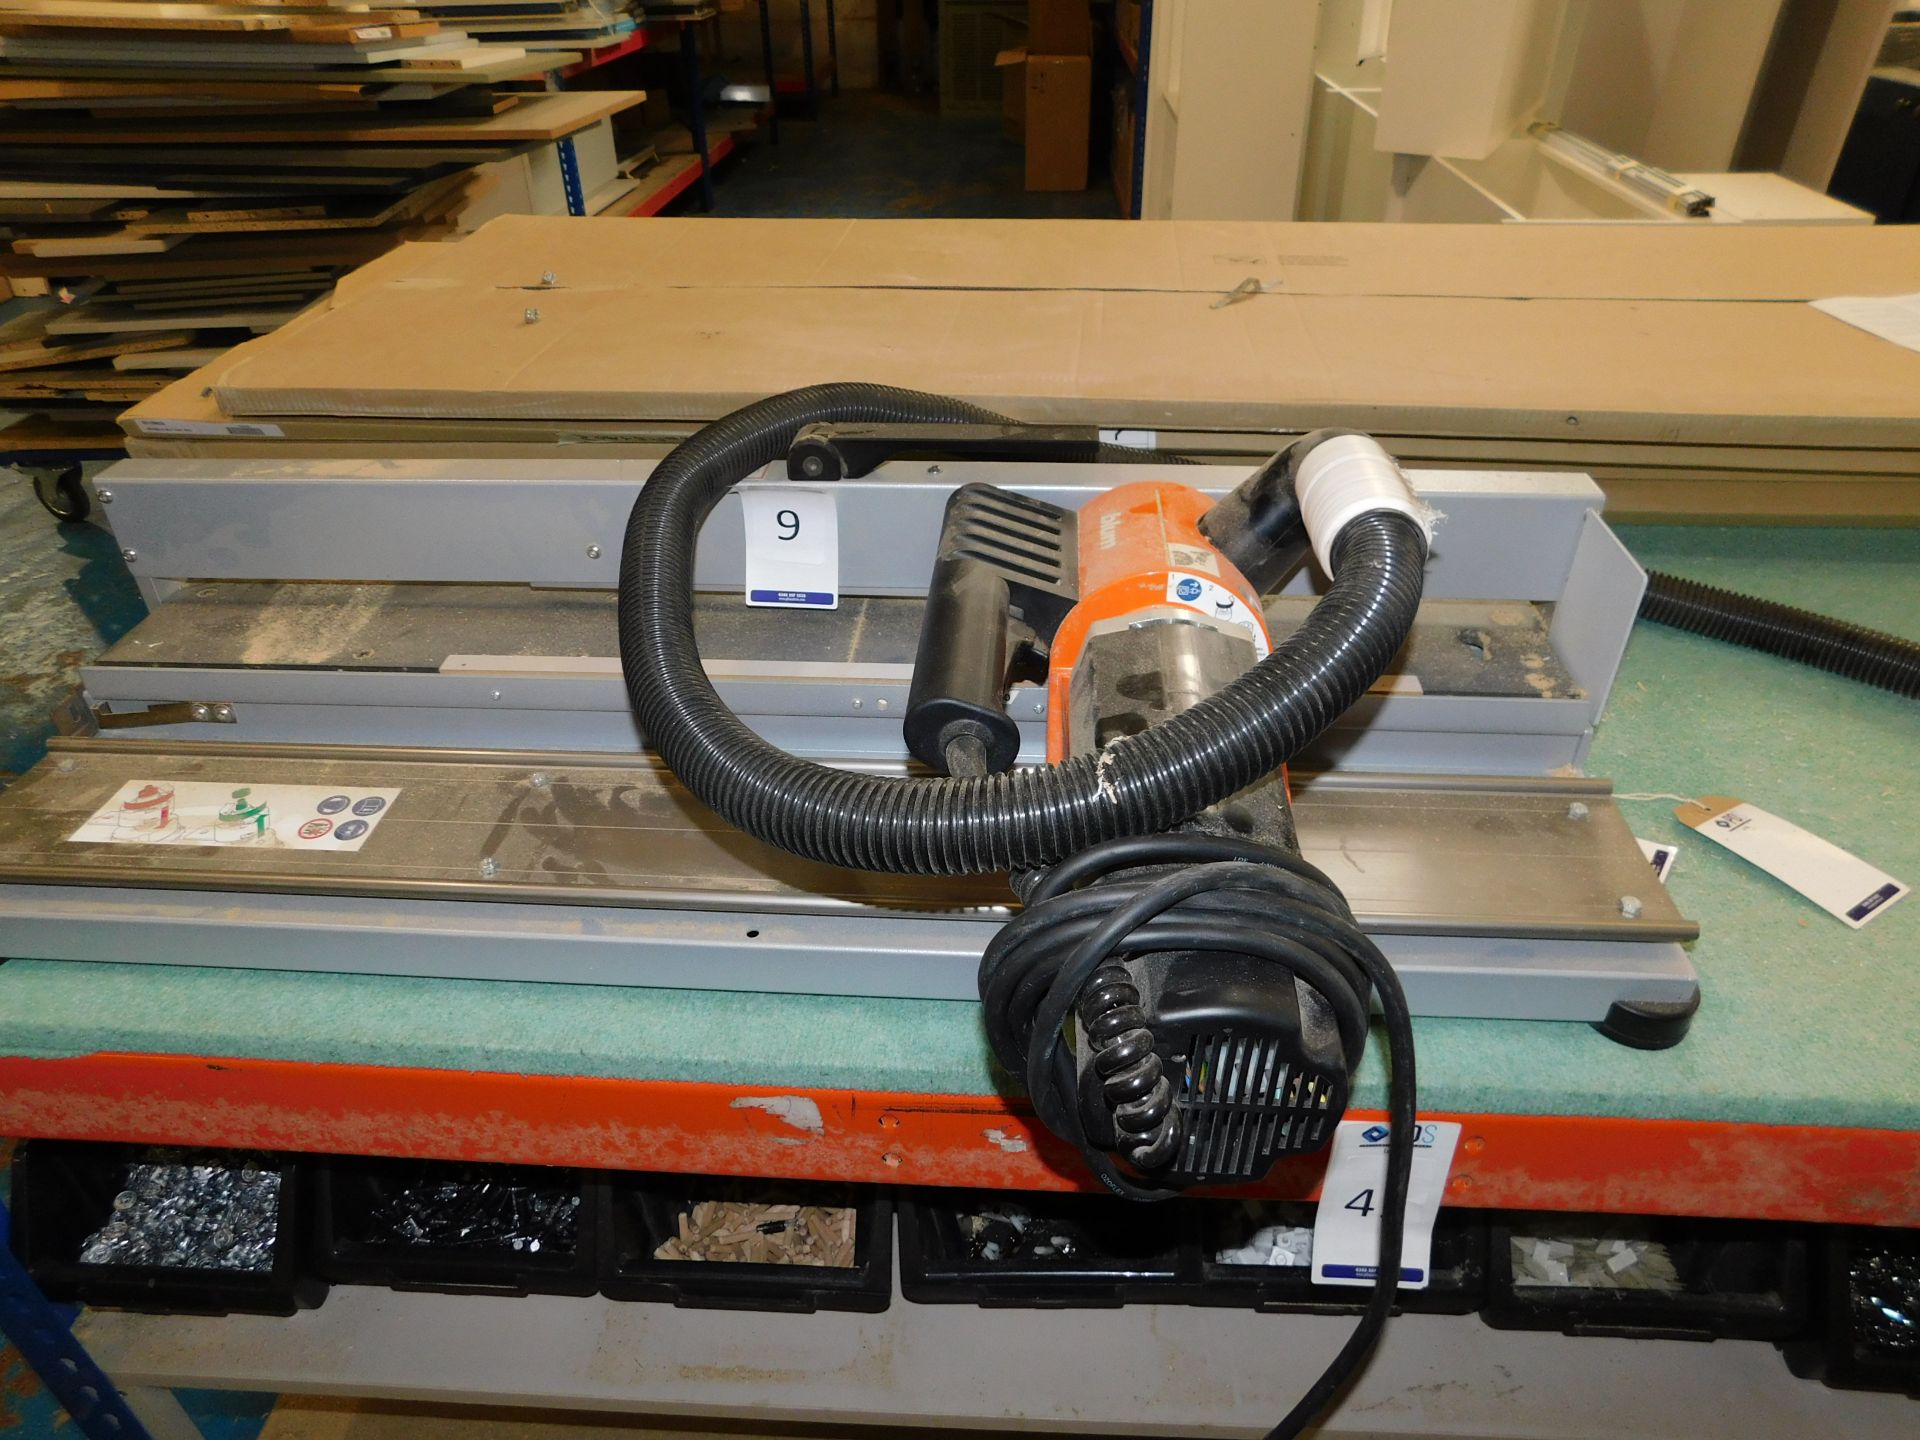 2015 Blum M35.7300 Sliding Saw Head, Serial Number: MB00237 (Location Walsall. Please Refer to